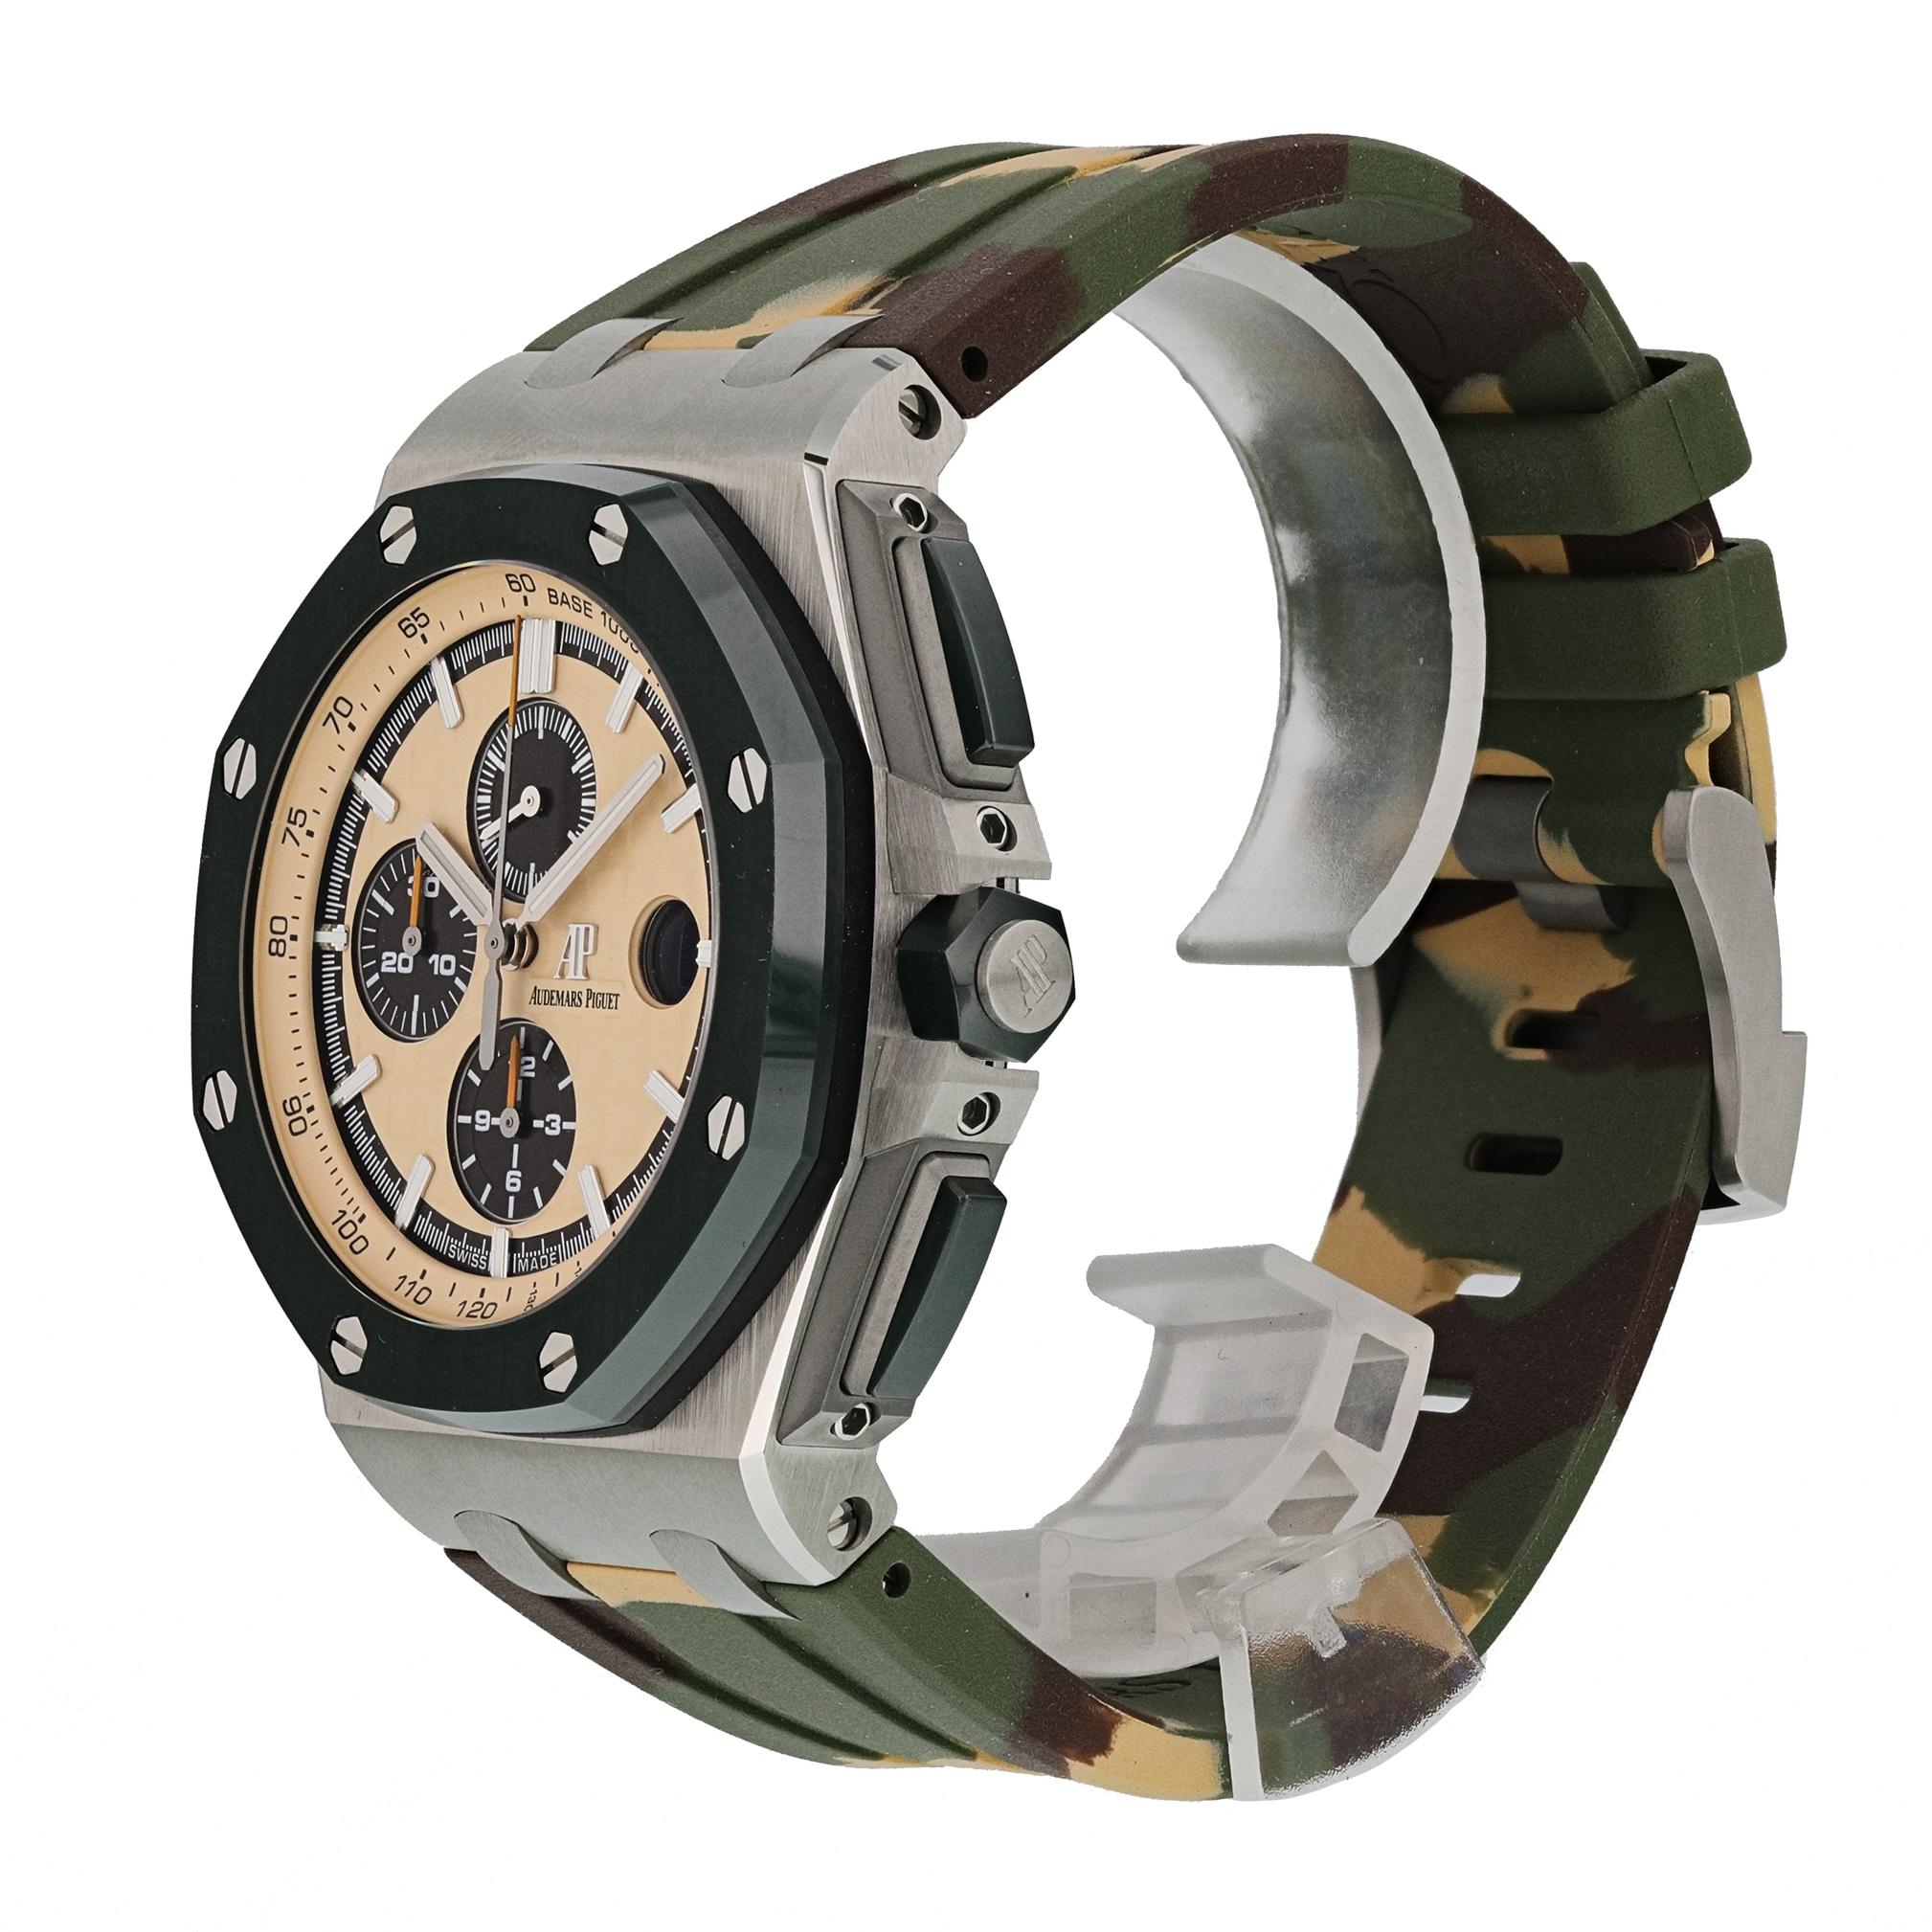 Audemars Piguet Royal Oak Offshore  26400SO.OO.A054CA.01 Mens Watch. 
38mm Platinum case. 
Ceramic green bezel. 
Beige dial with Luminous Steel hands and index hour markers. 
Minute markers on the outer dial. 
Date display at the 3 o'clock position.